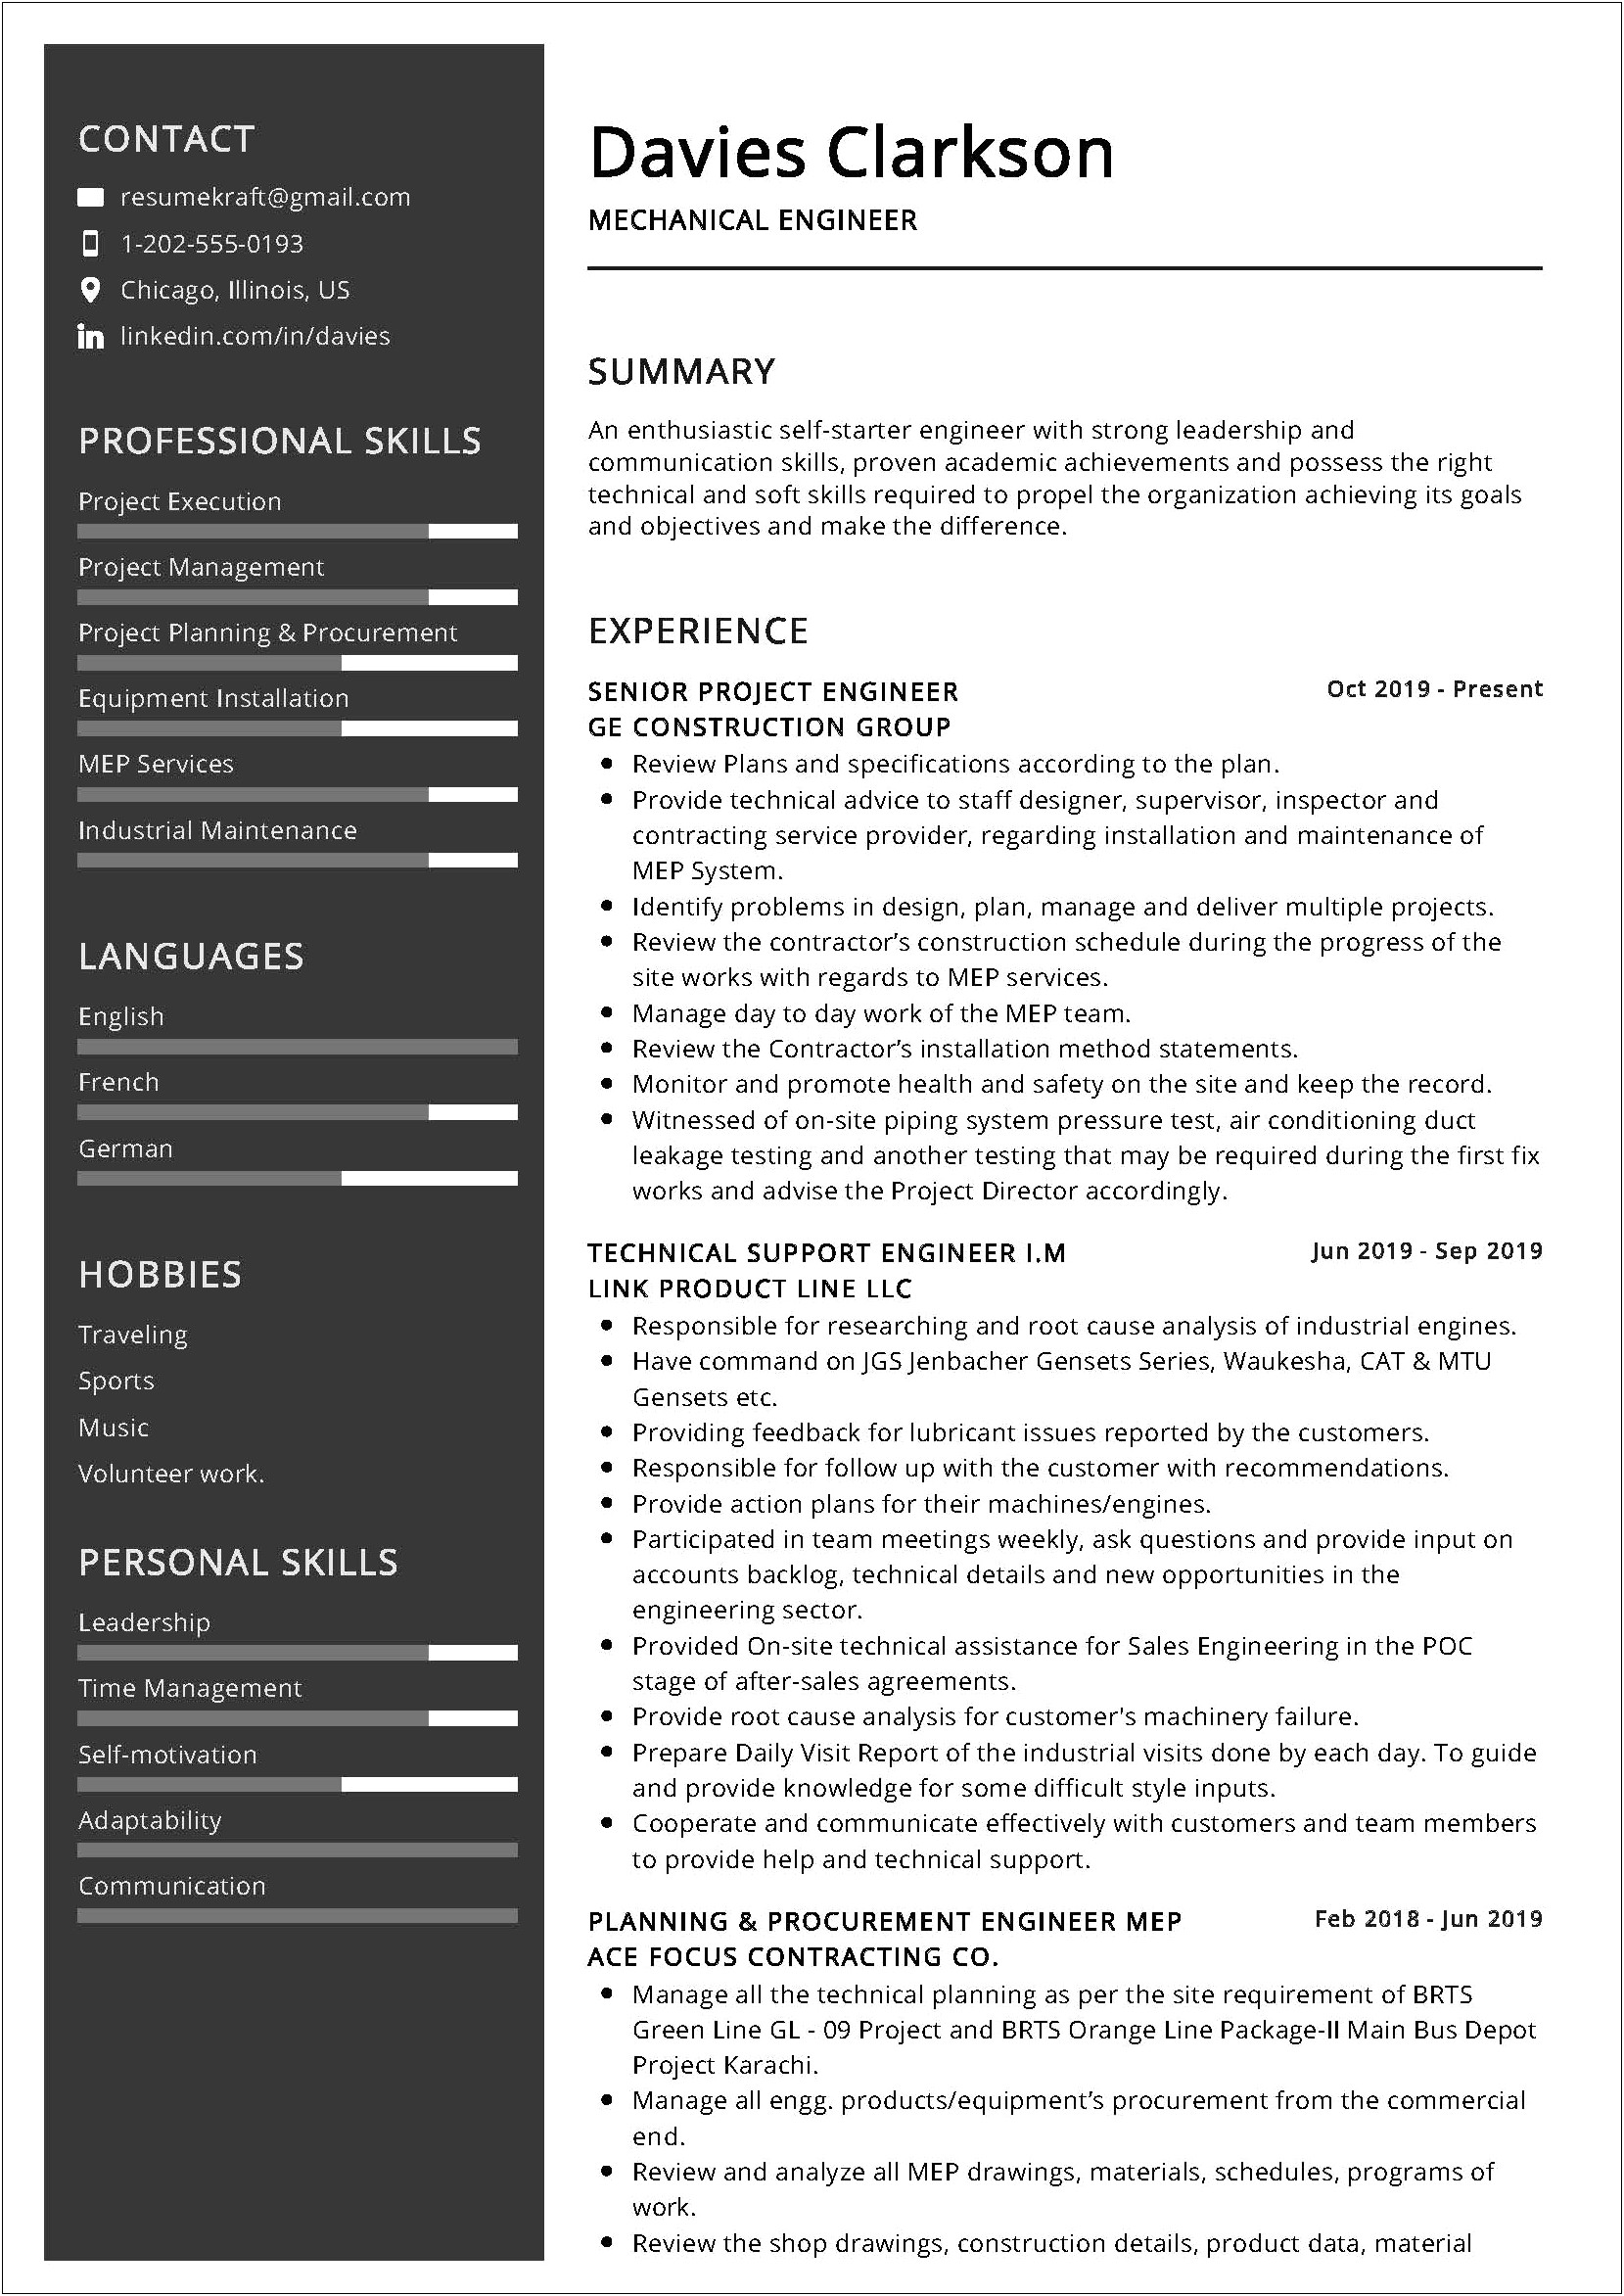 Resume Word Format For Mechanical Engineers